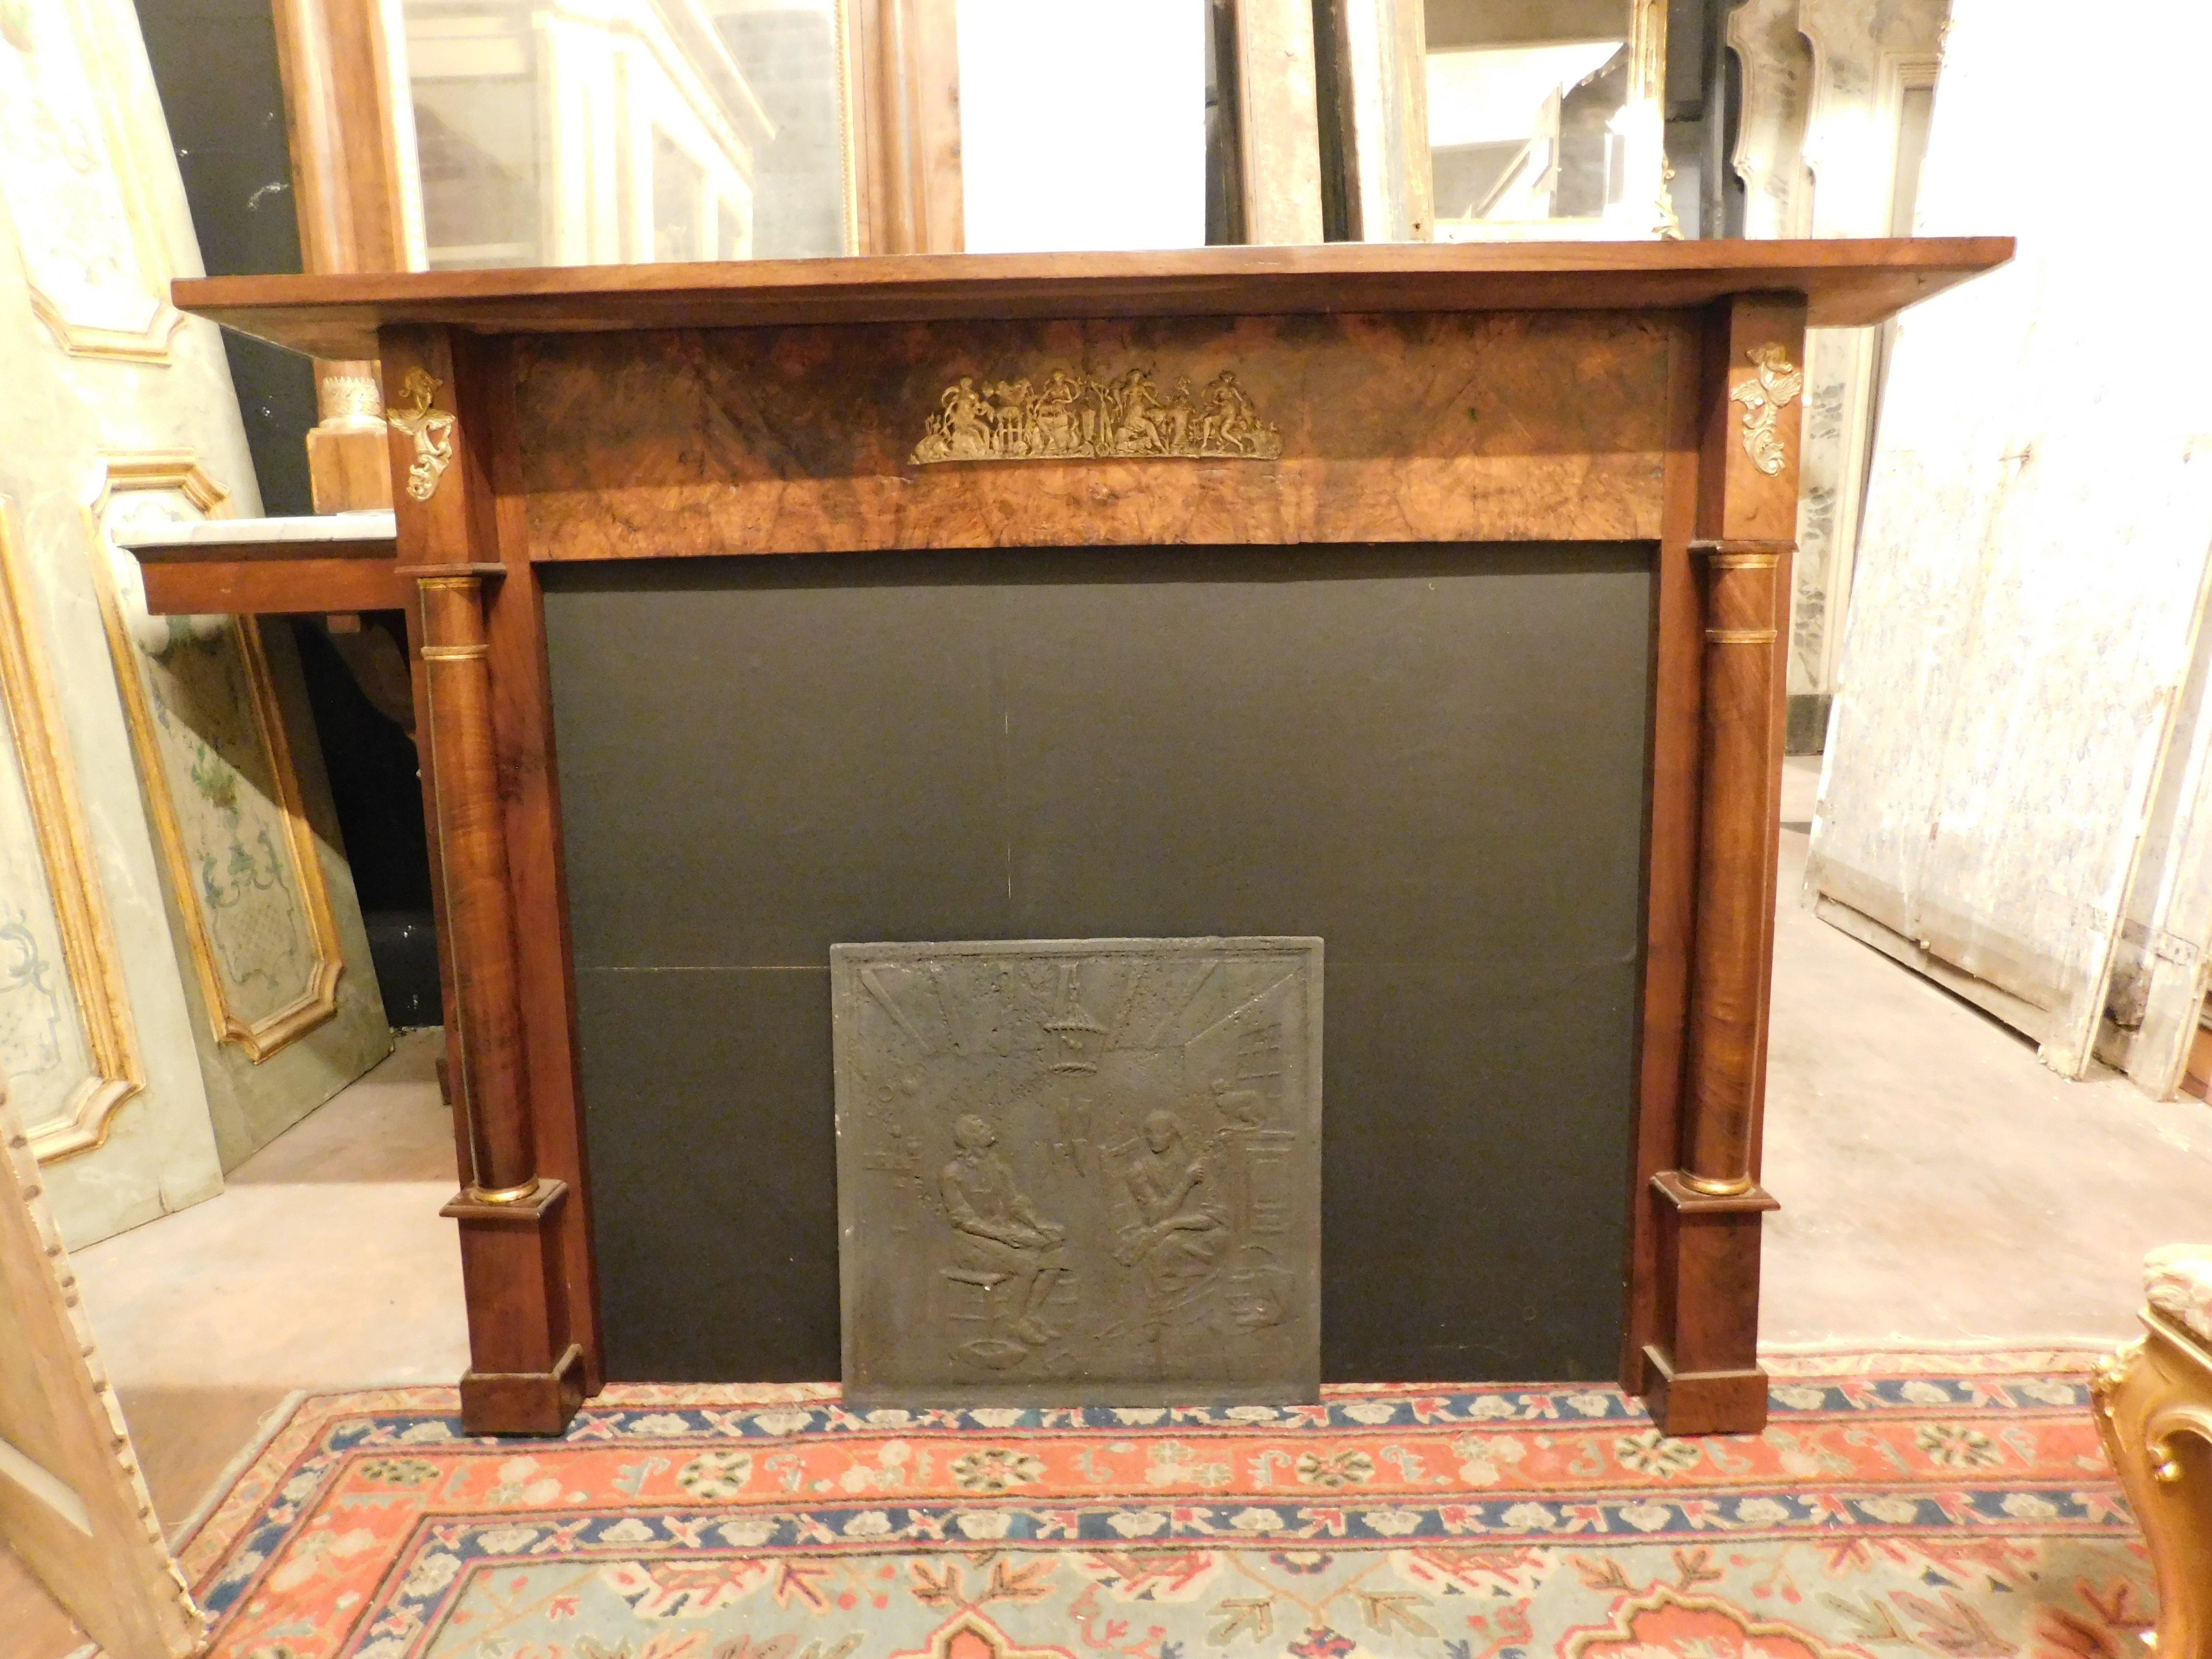 Antique fireplace mantle in walnut root wood, carved with columns and with golden brass finishes, from Italy, 19th century, external measurement cm w 170 x H 123 x D 26, mouth measurement cm w 118 x H 96
​